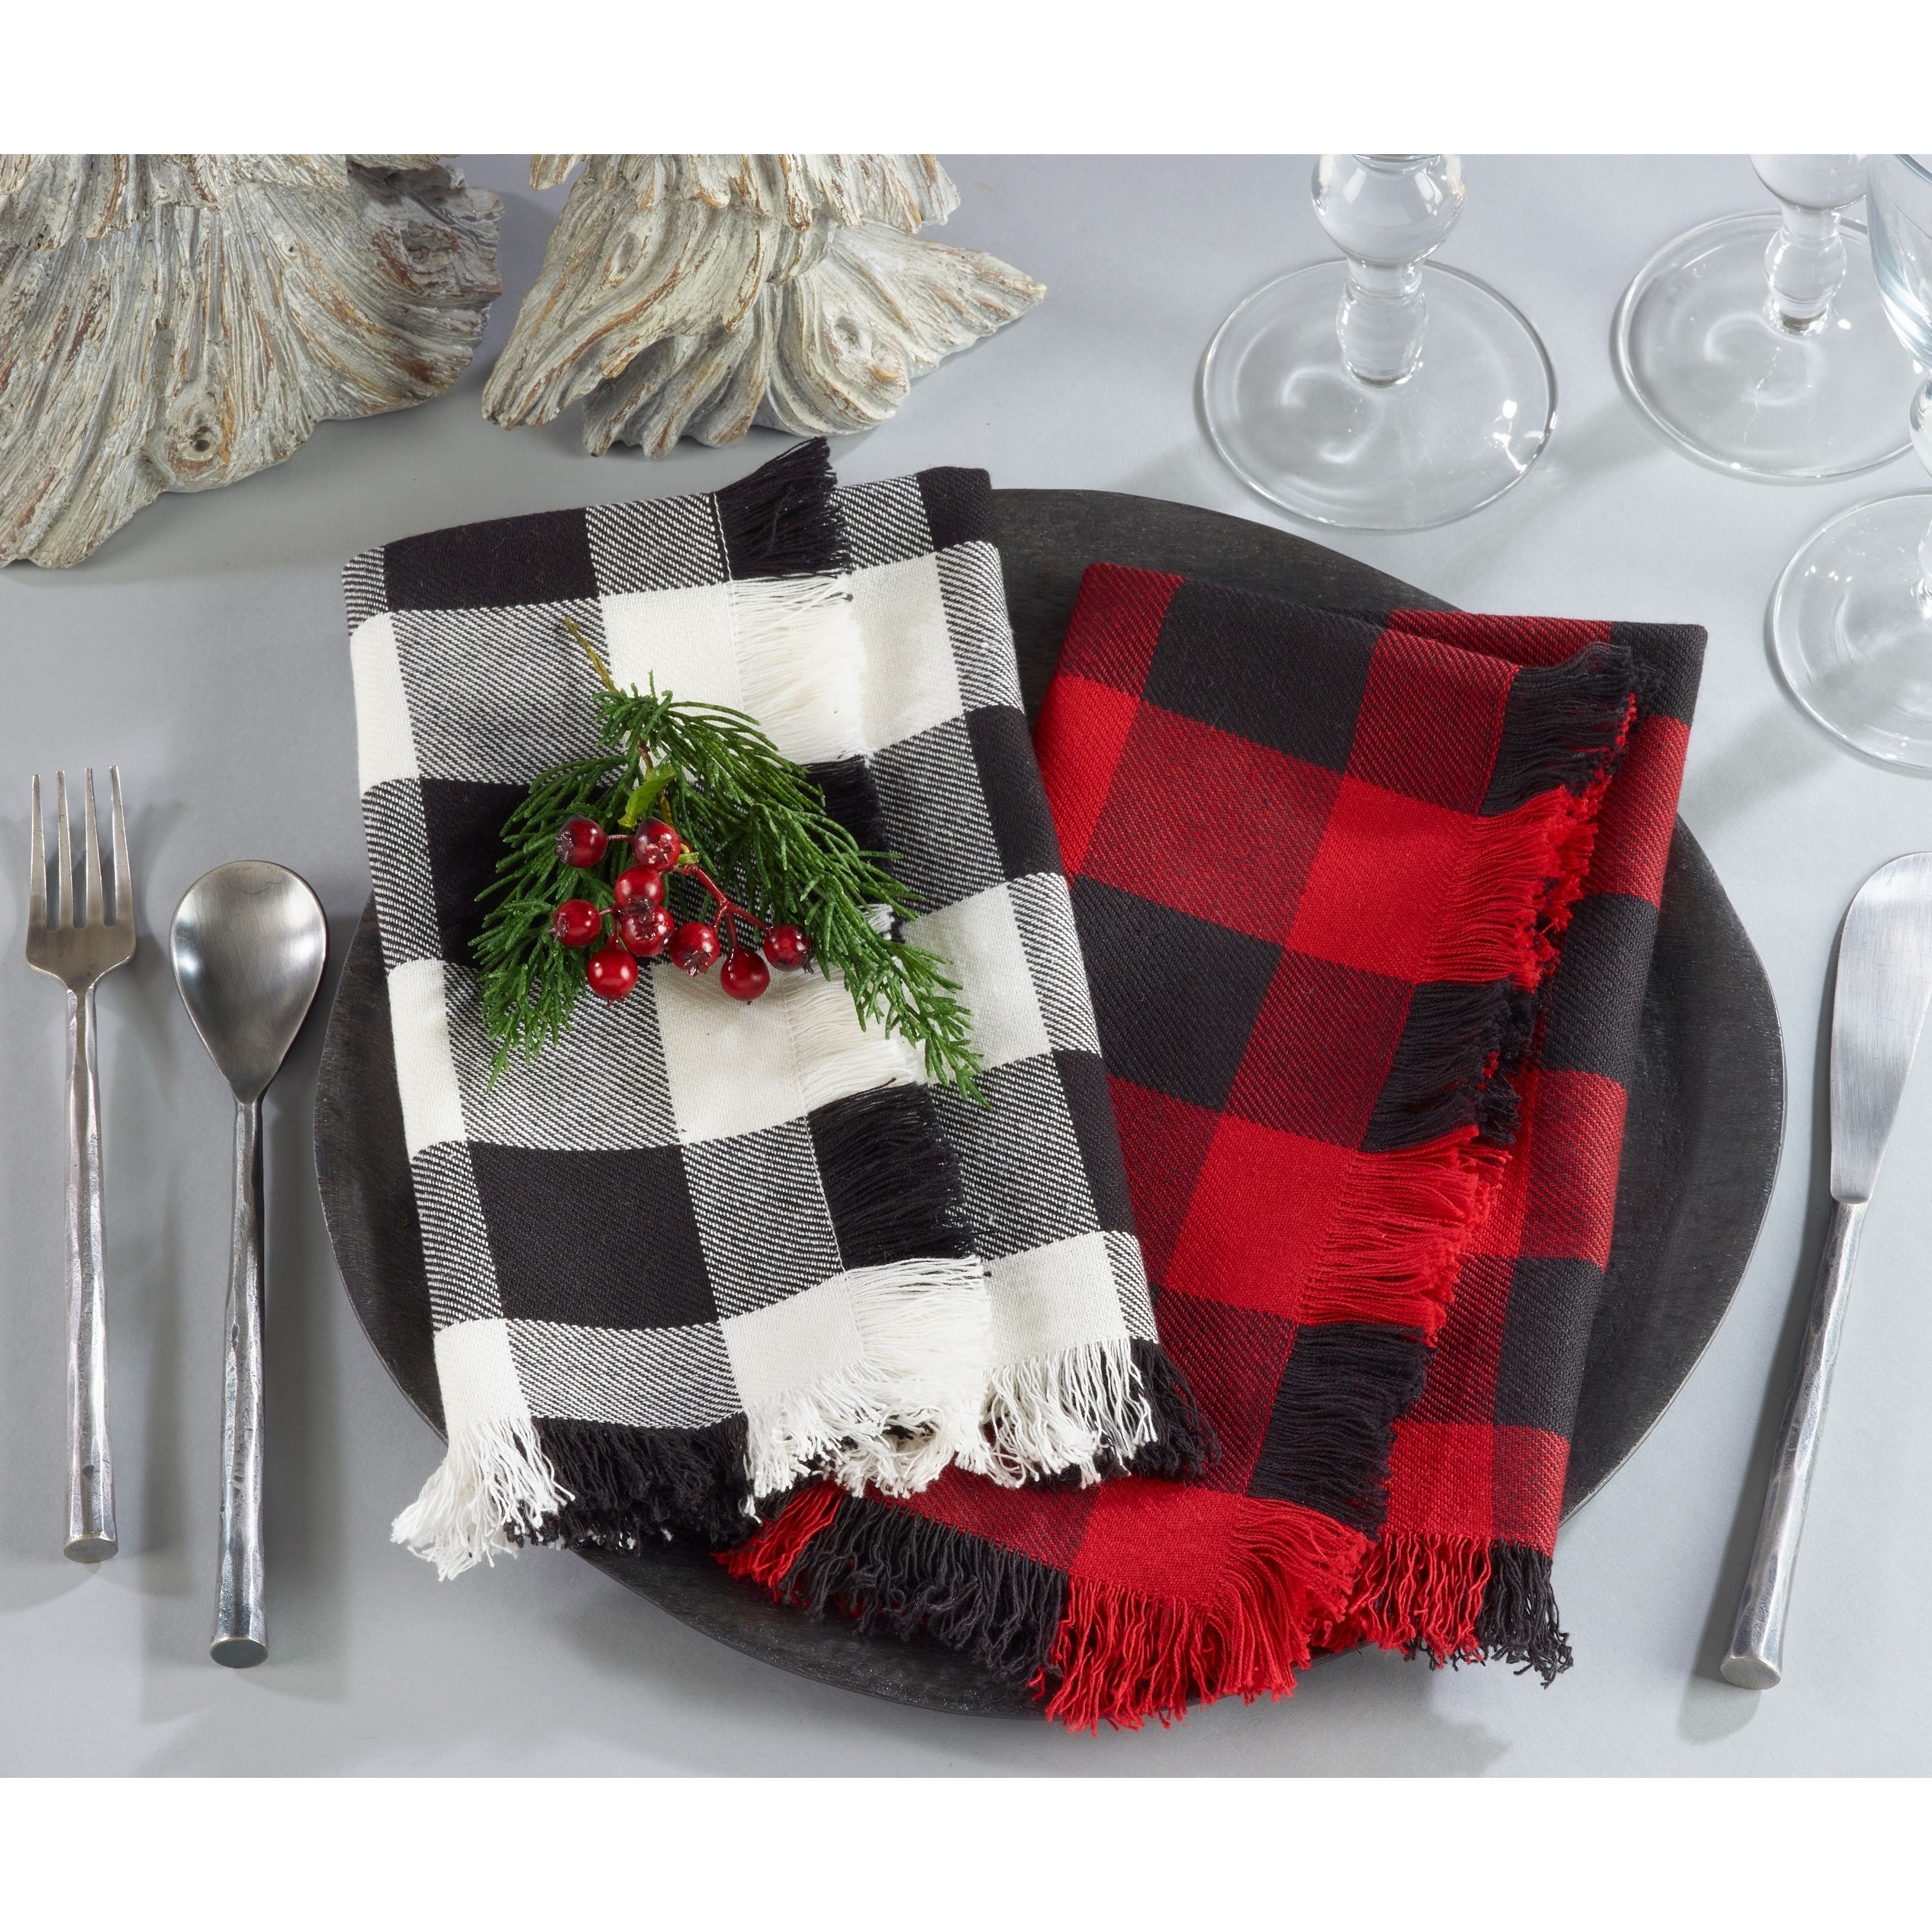 All Cotton and Linen Cloth Napkins Set of 6, Red Cotton Napkins, Cotton  Dinner Napkins, Buffalo Plaid Napkins, Red Checkered Napkins Washable